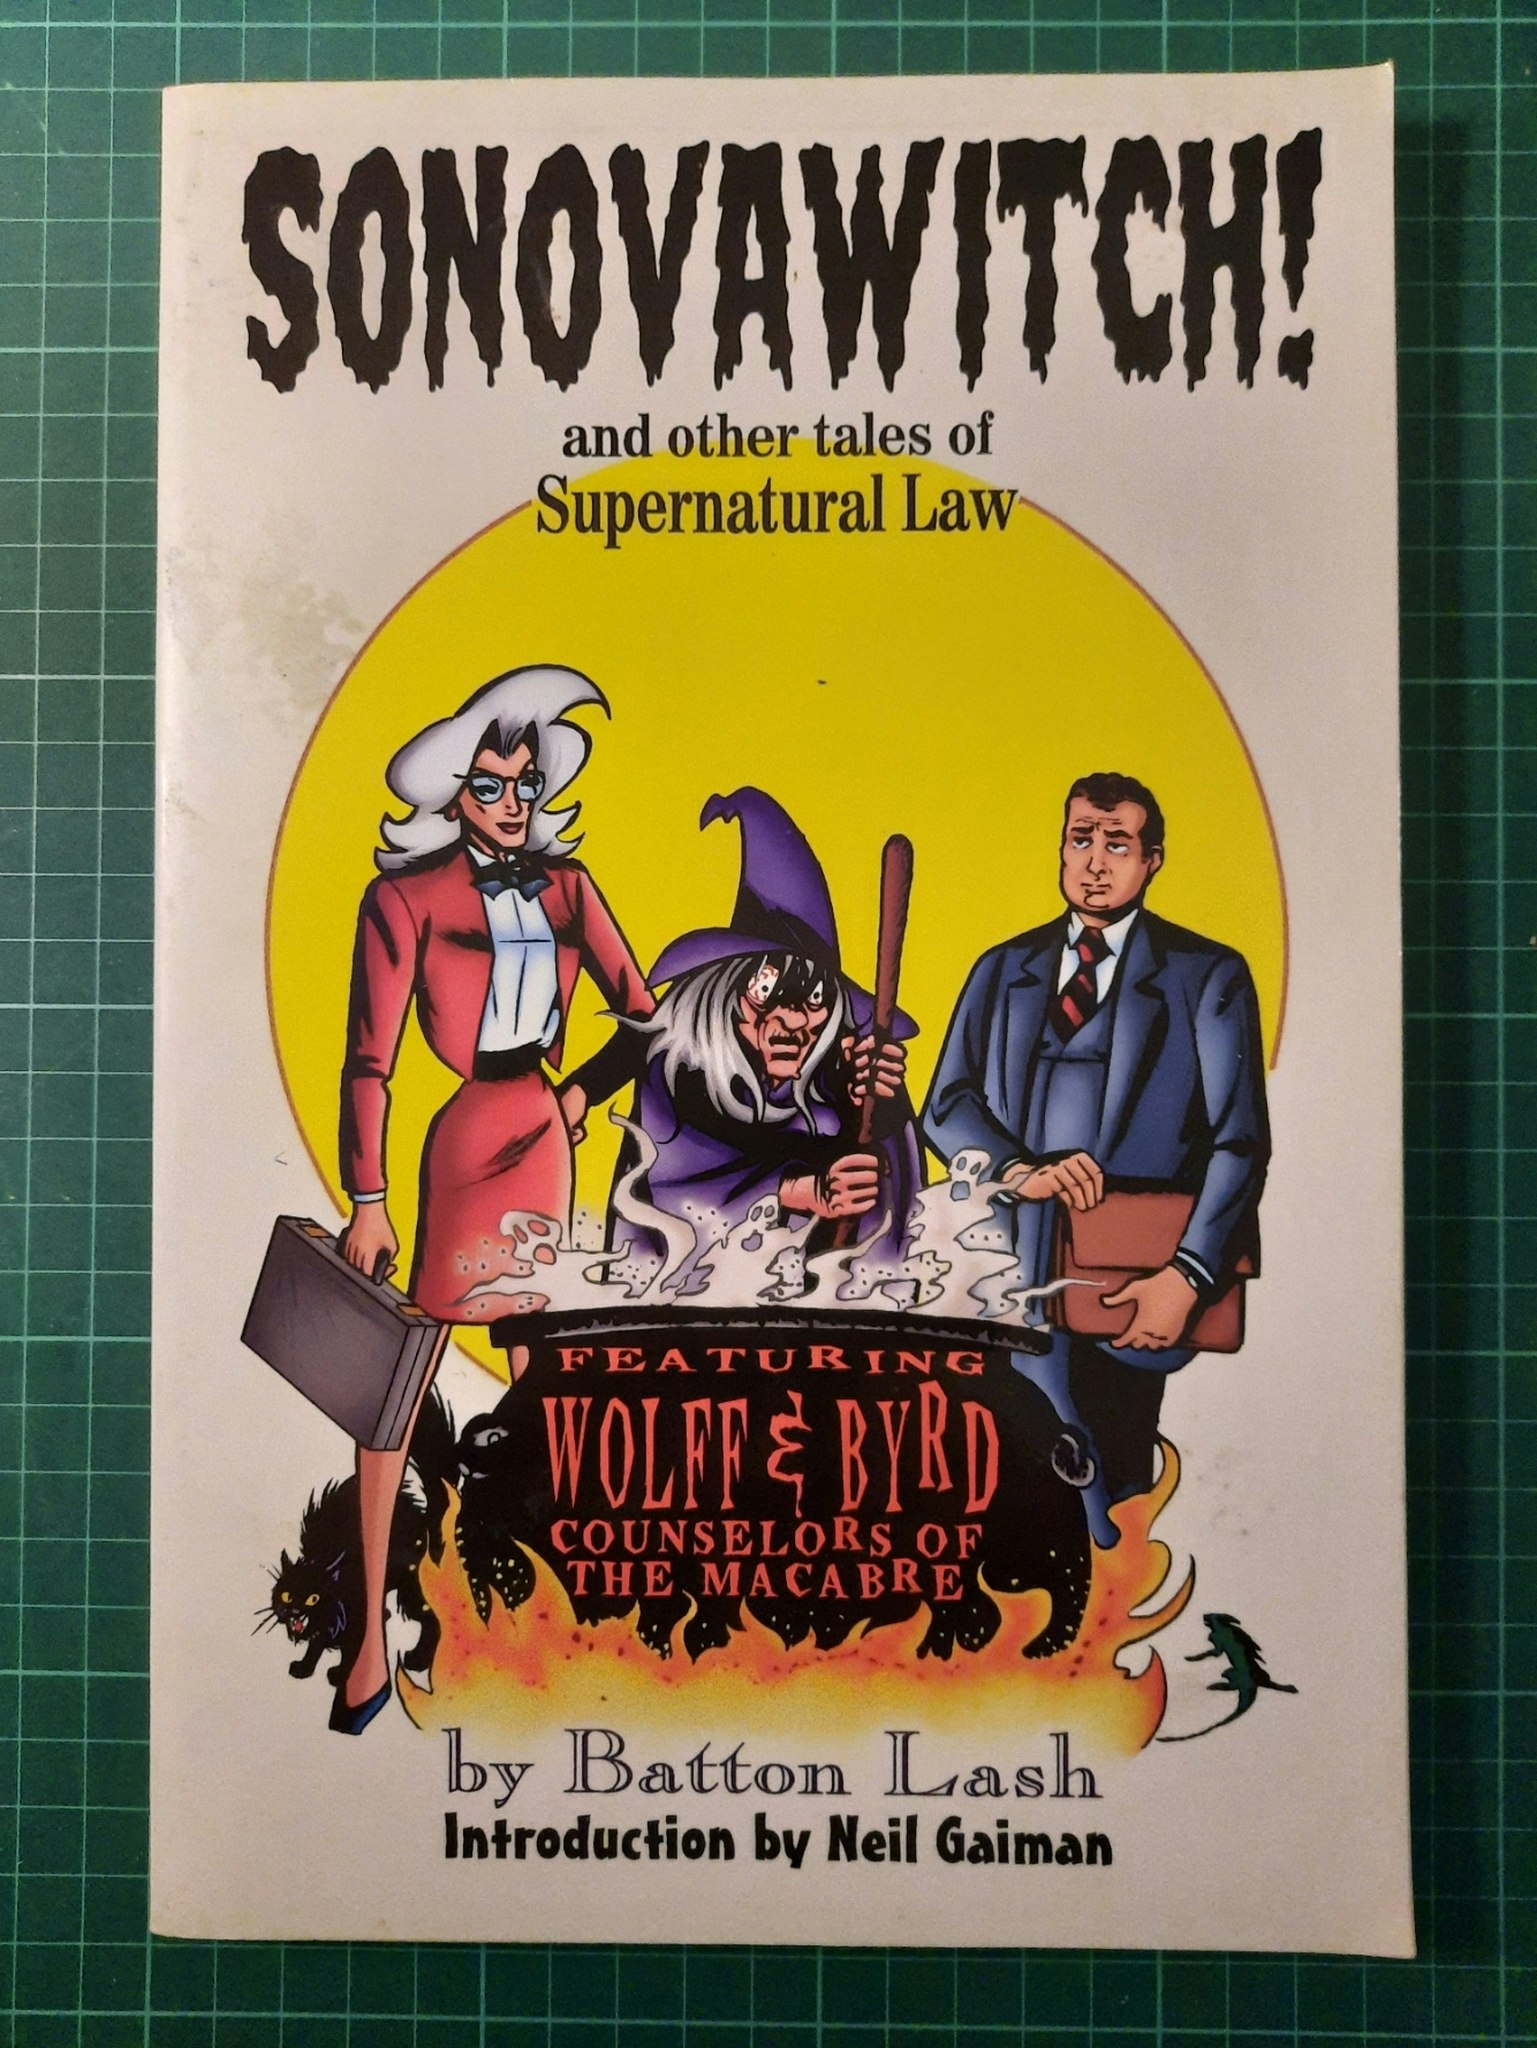 Supernatural law : Sonovawitch!